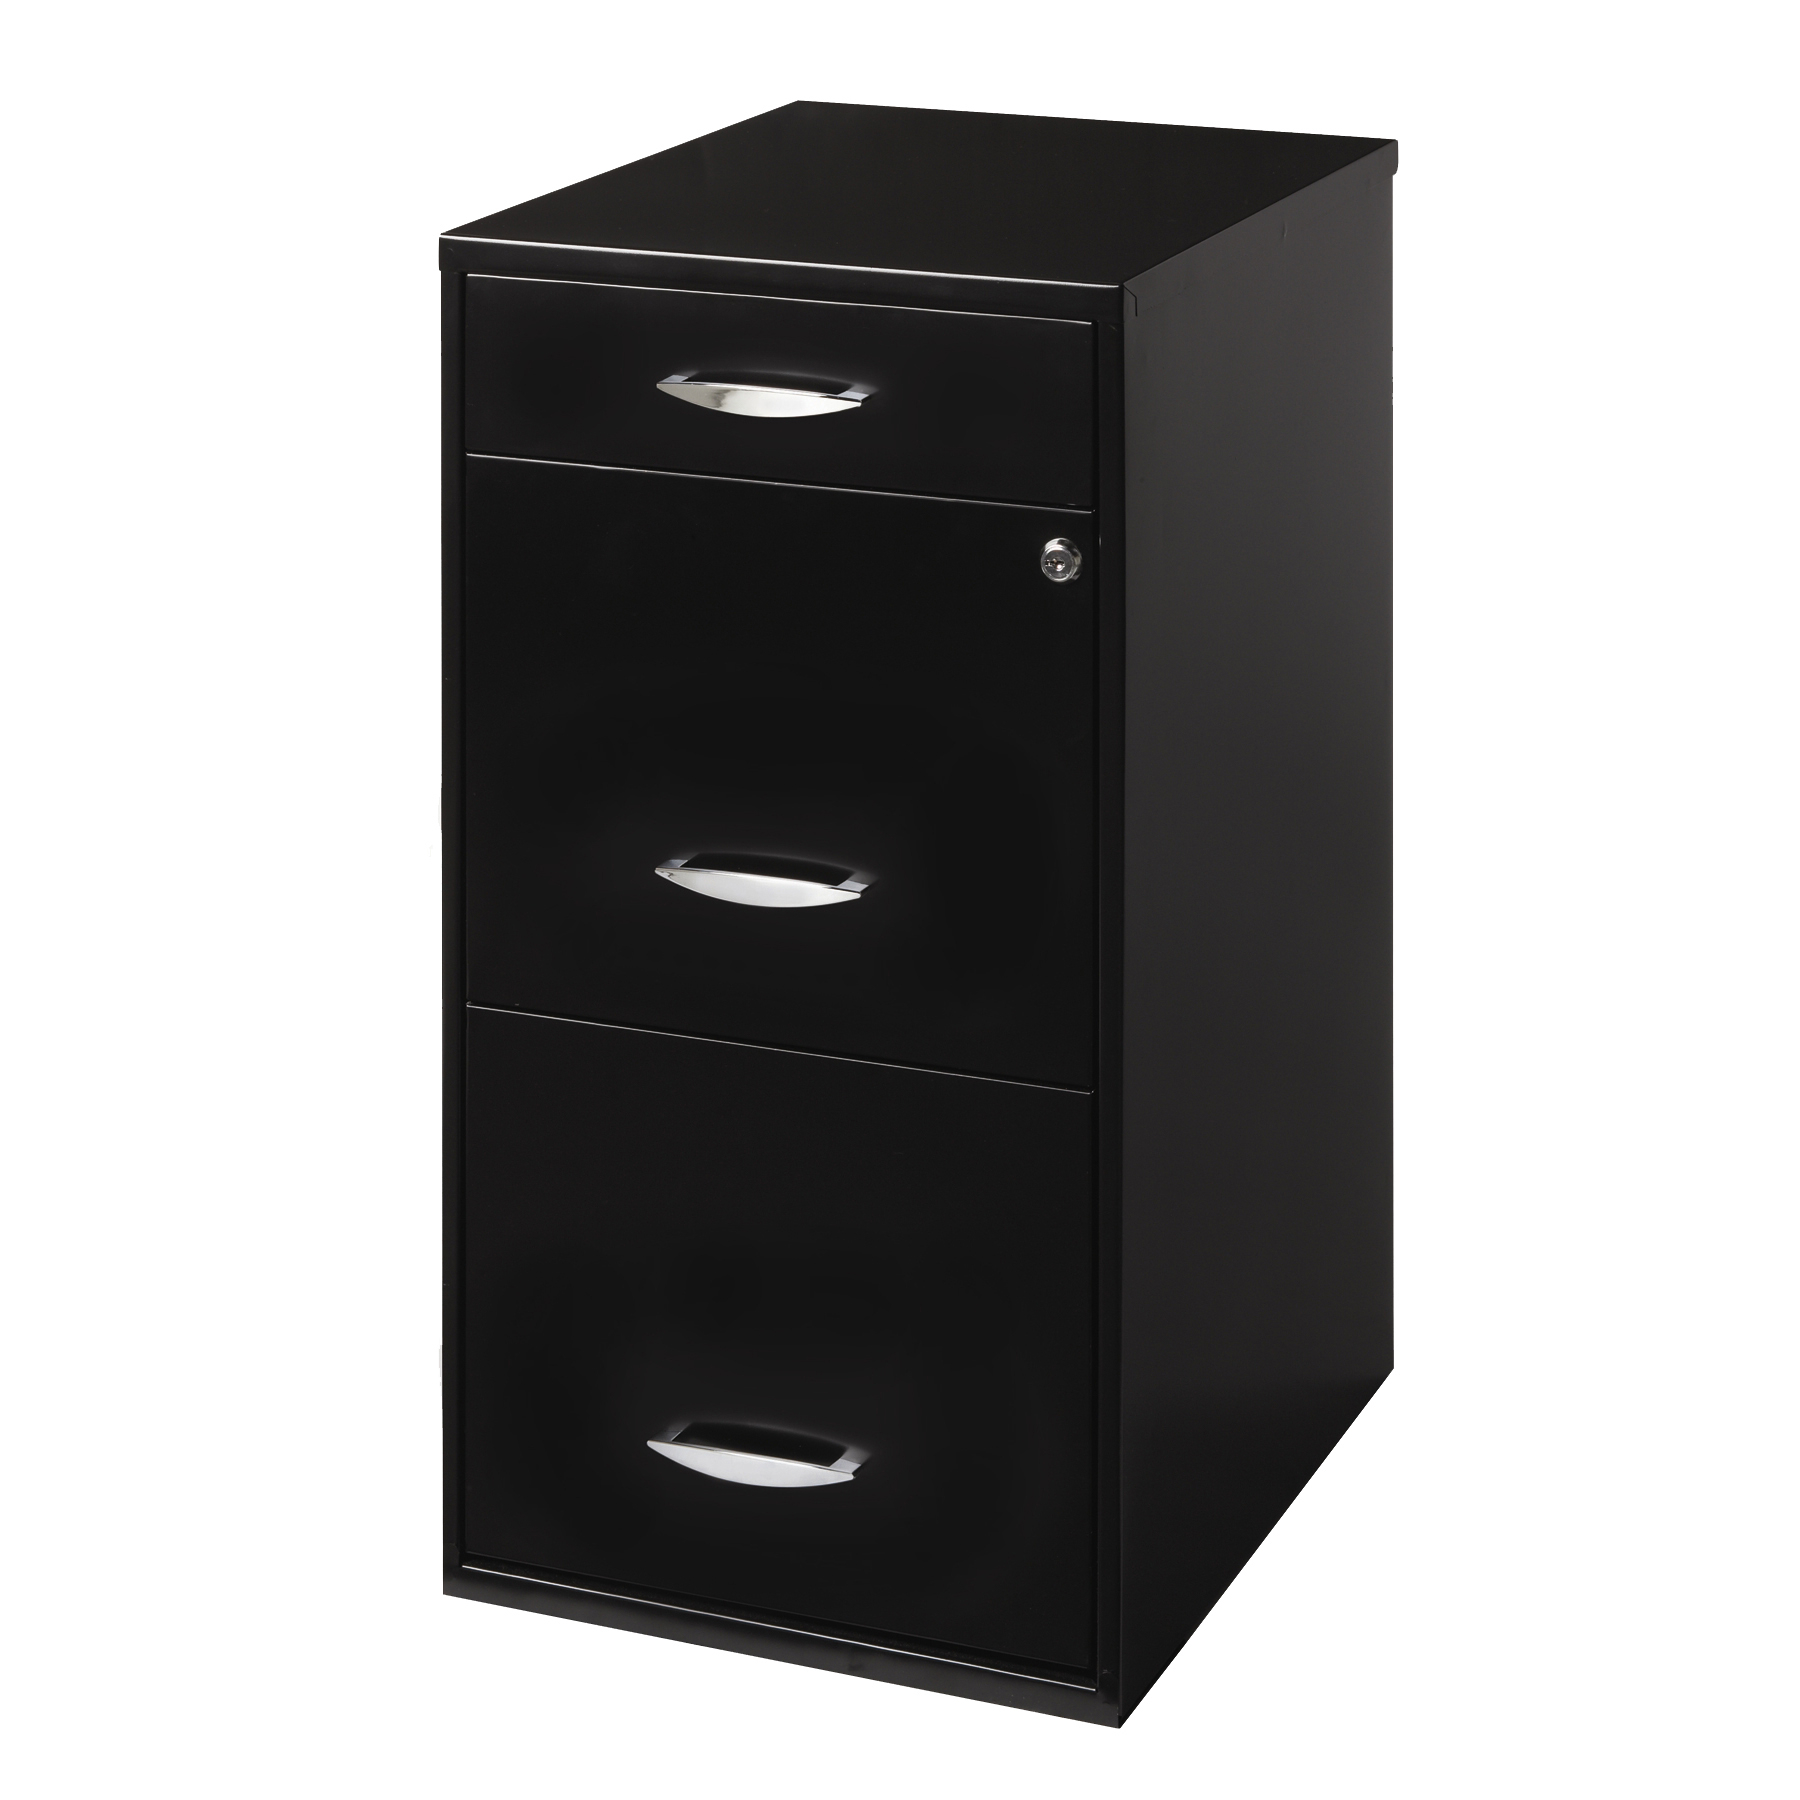 Filing Cabinet 18w 3 Drawer Organizer File Black Walmart intended for sizing 1800 X 1800